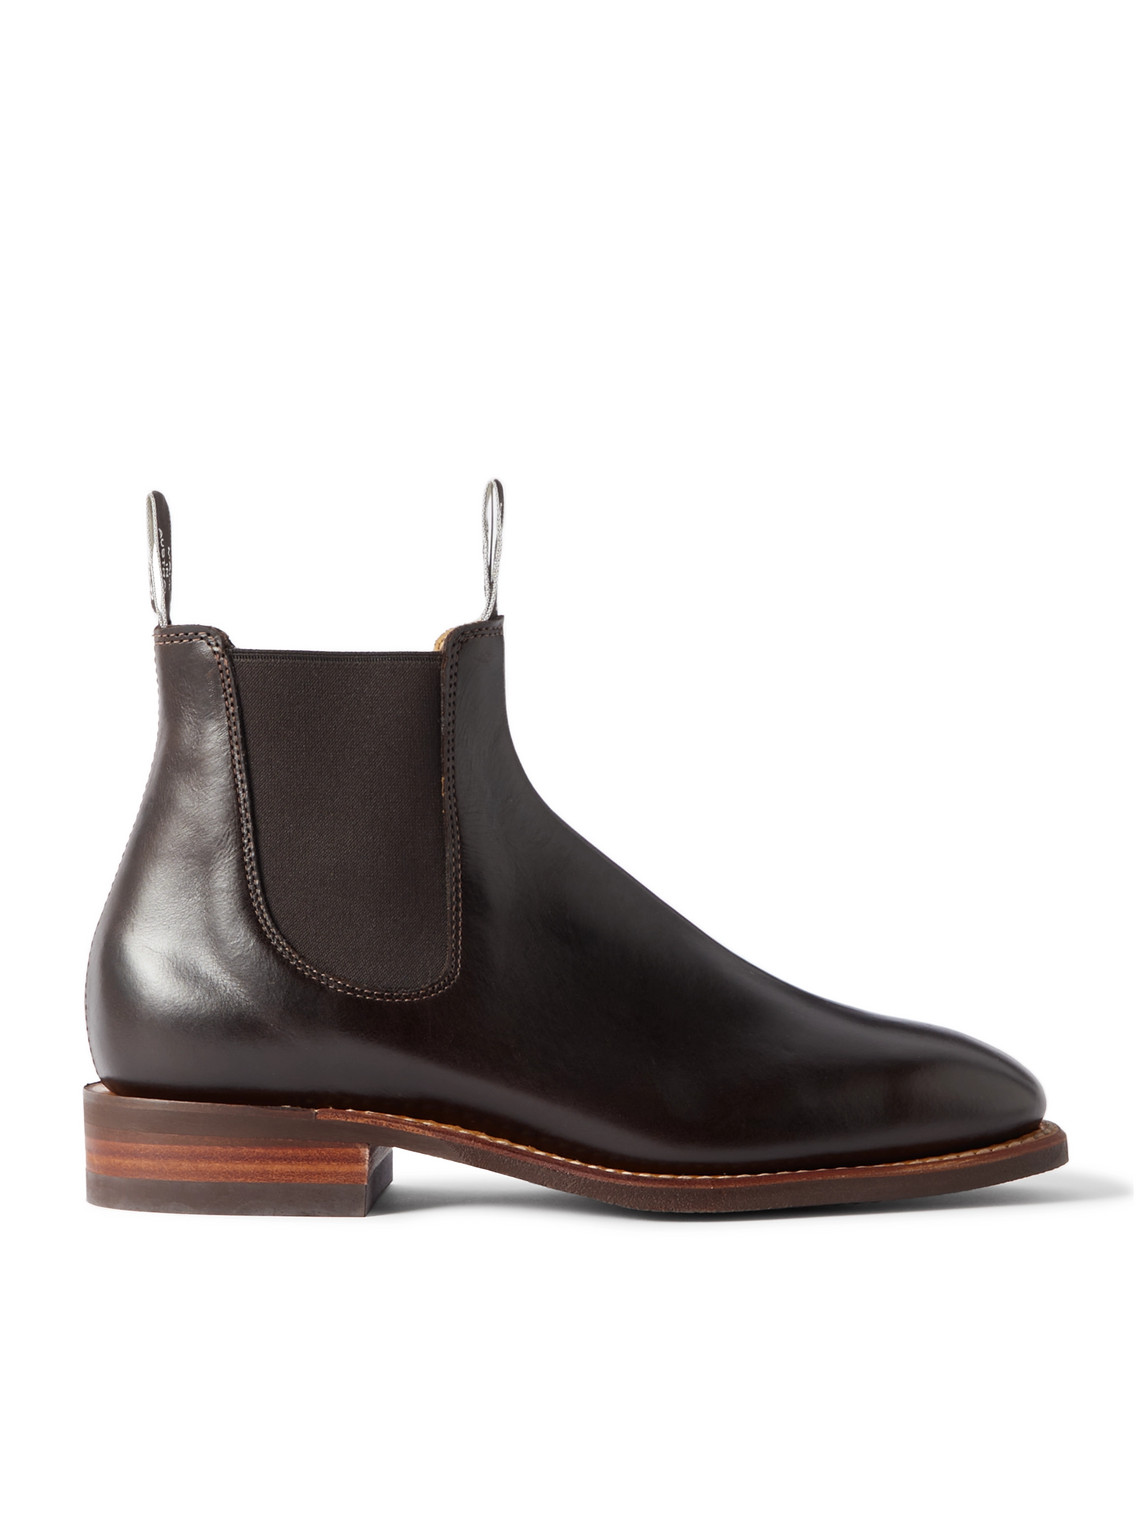 R.M.Williams Leather Chelsea Boots